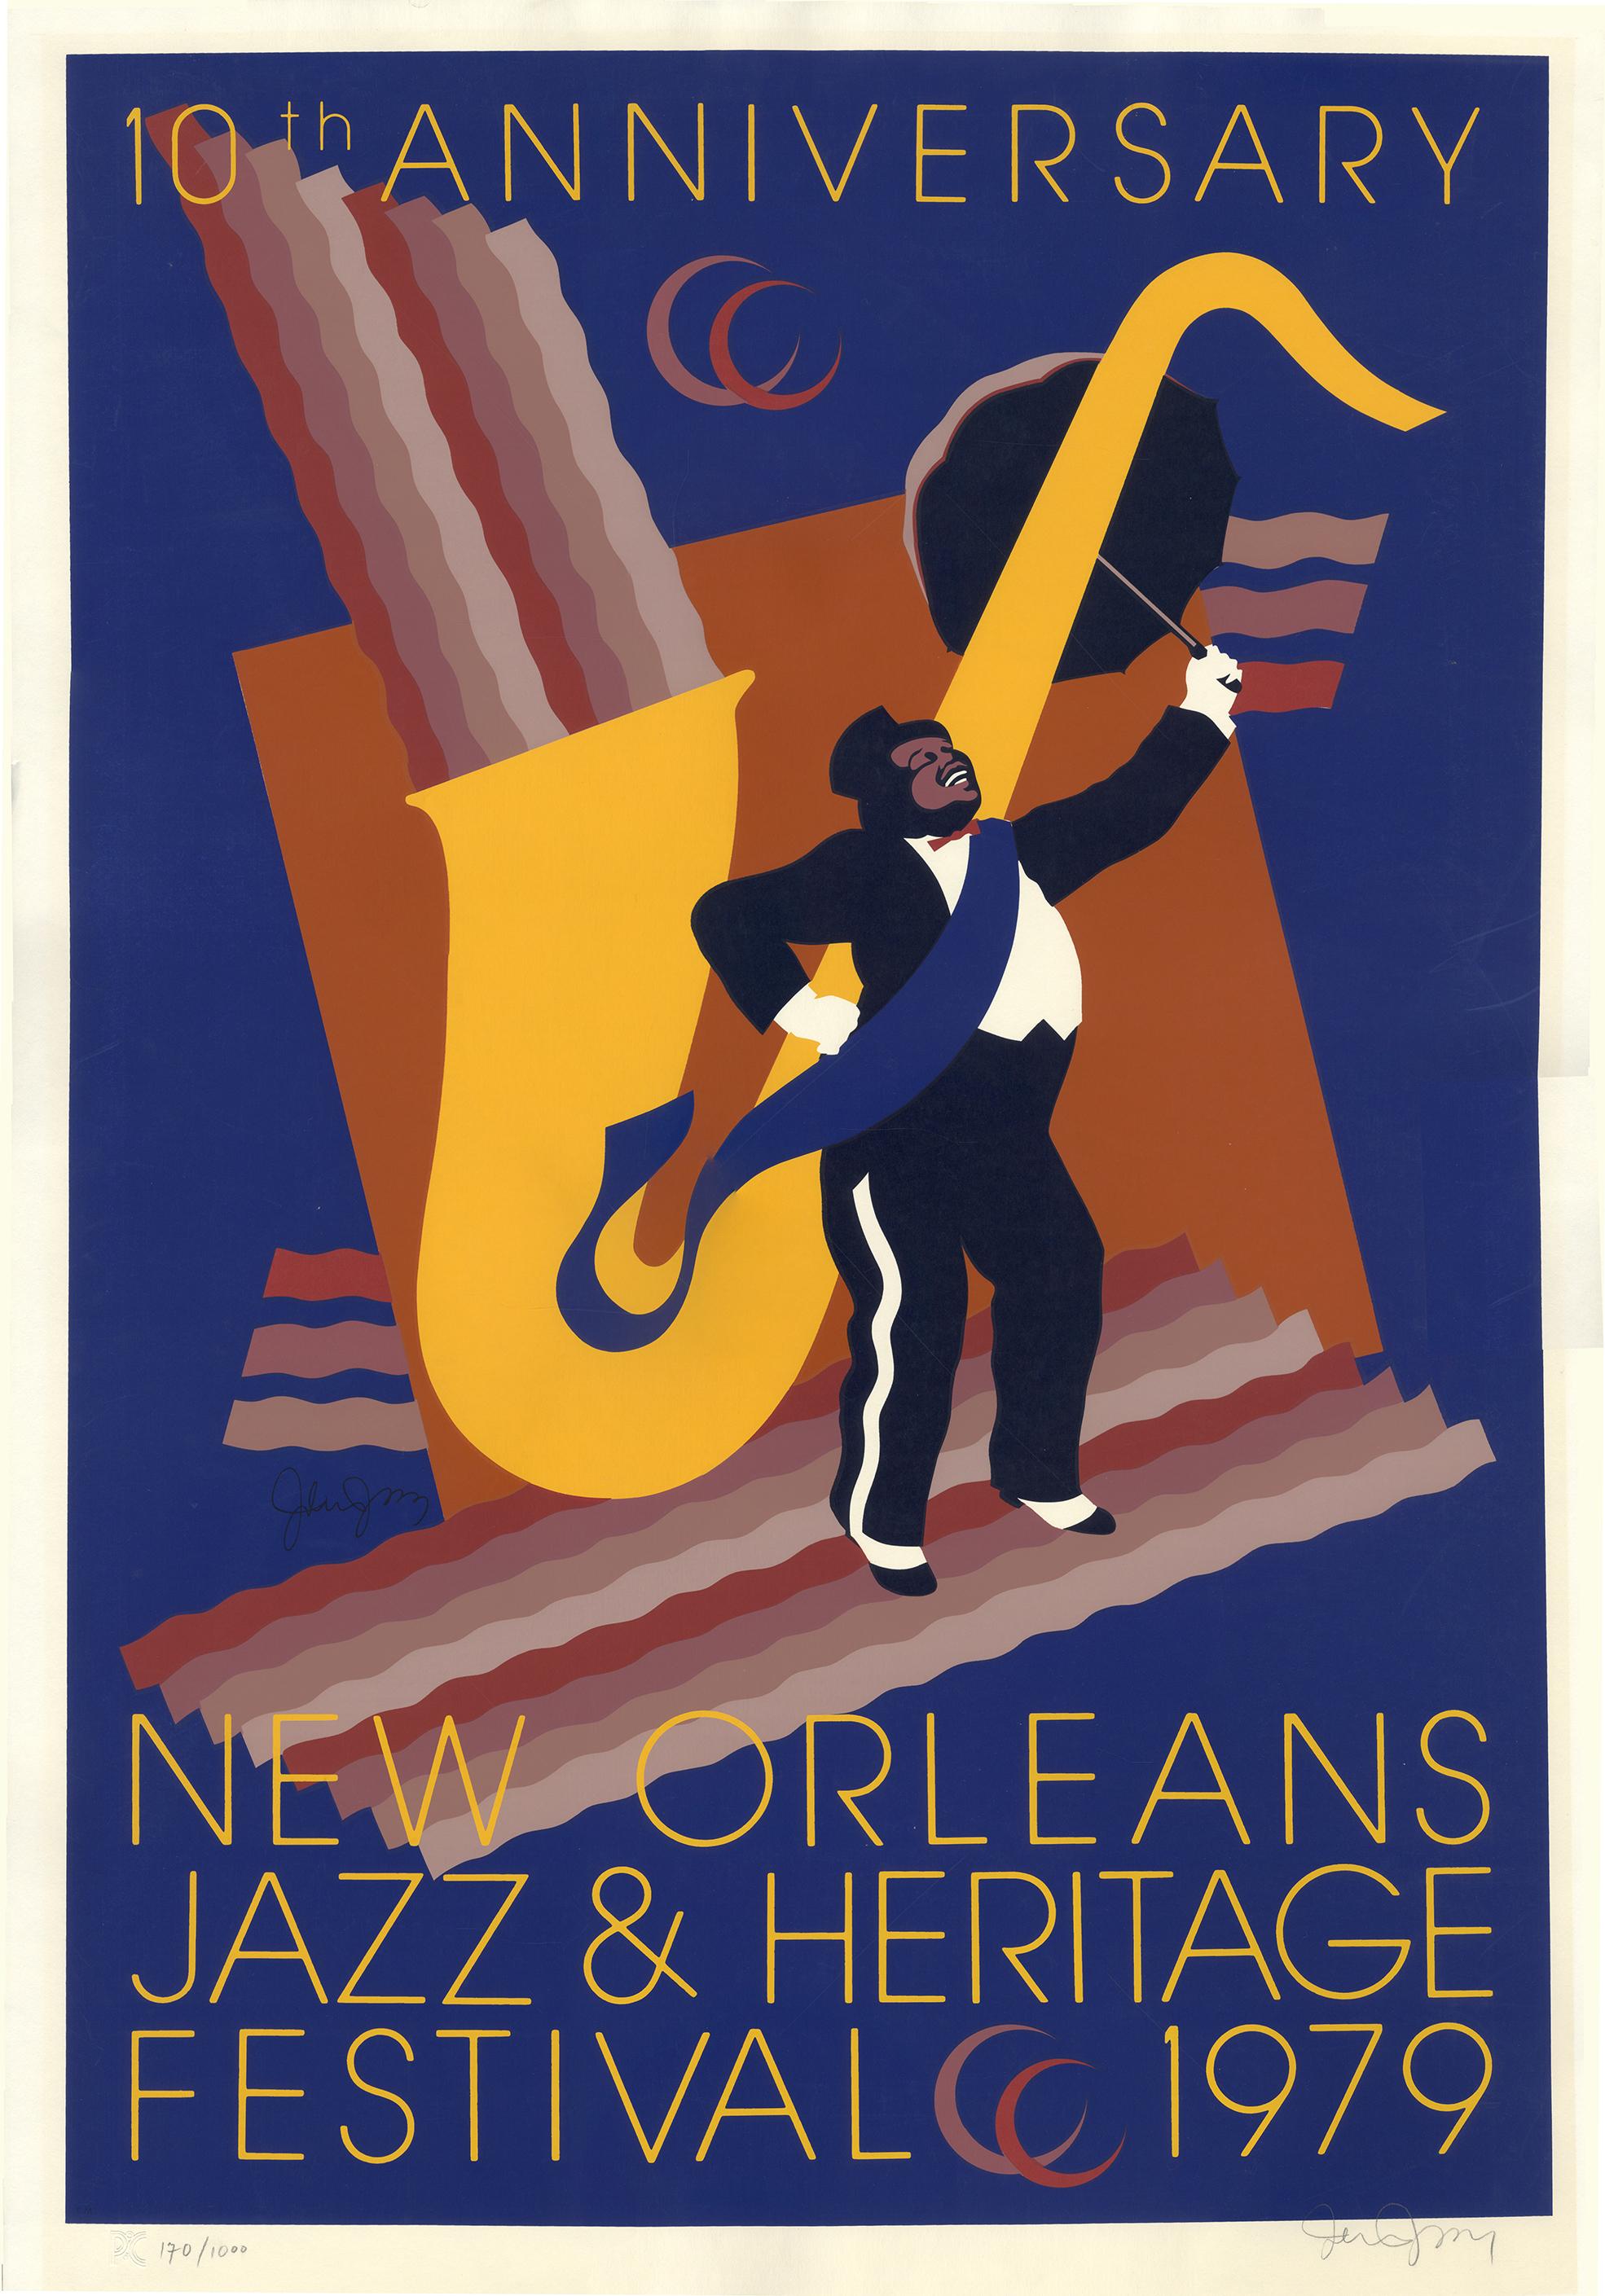 John Martinez Print - 10th Anniversary New Orleans Jazz and Heritage Festival Poster - 1979